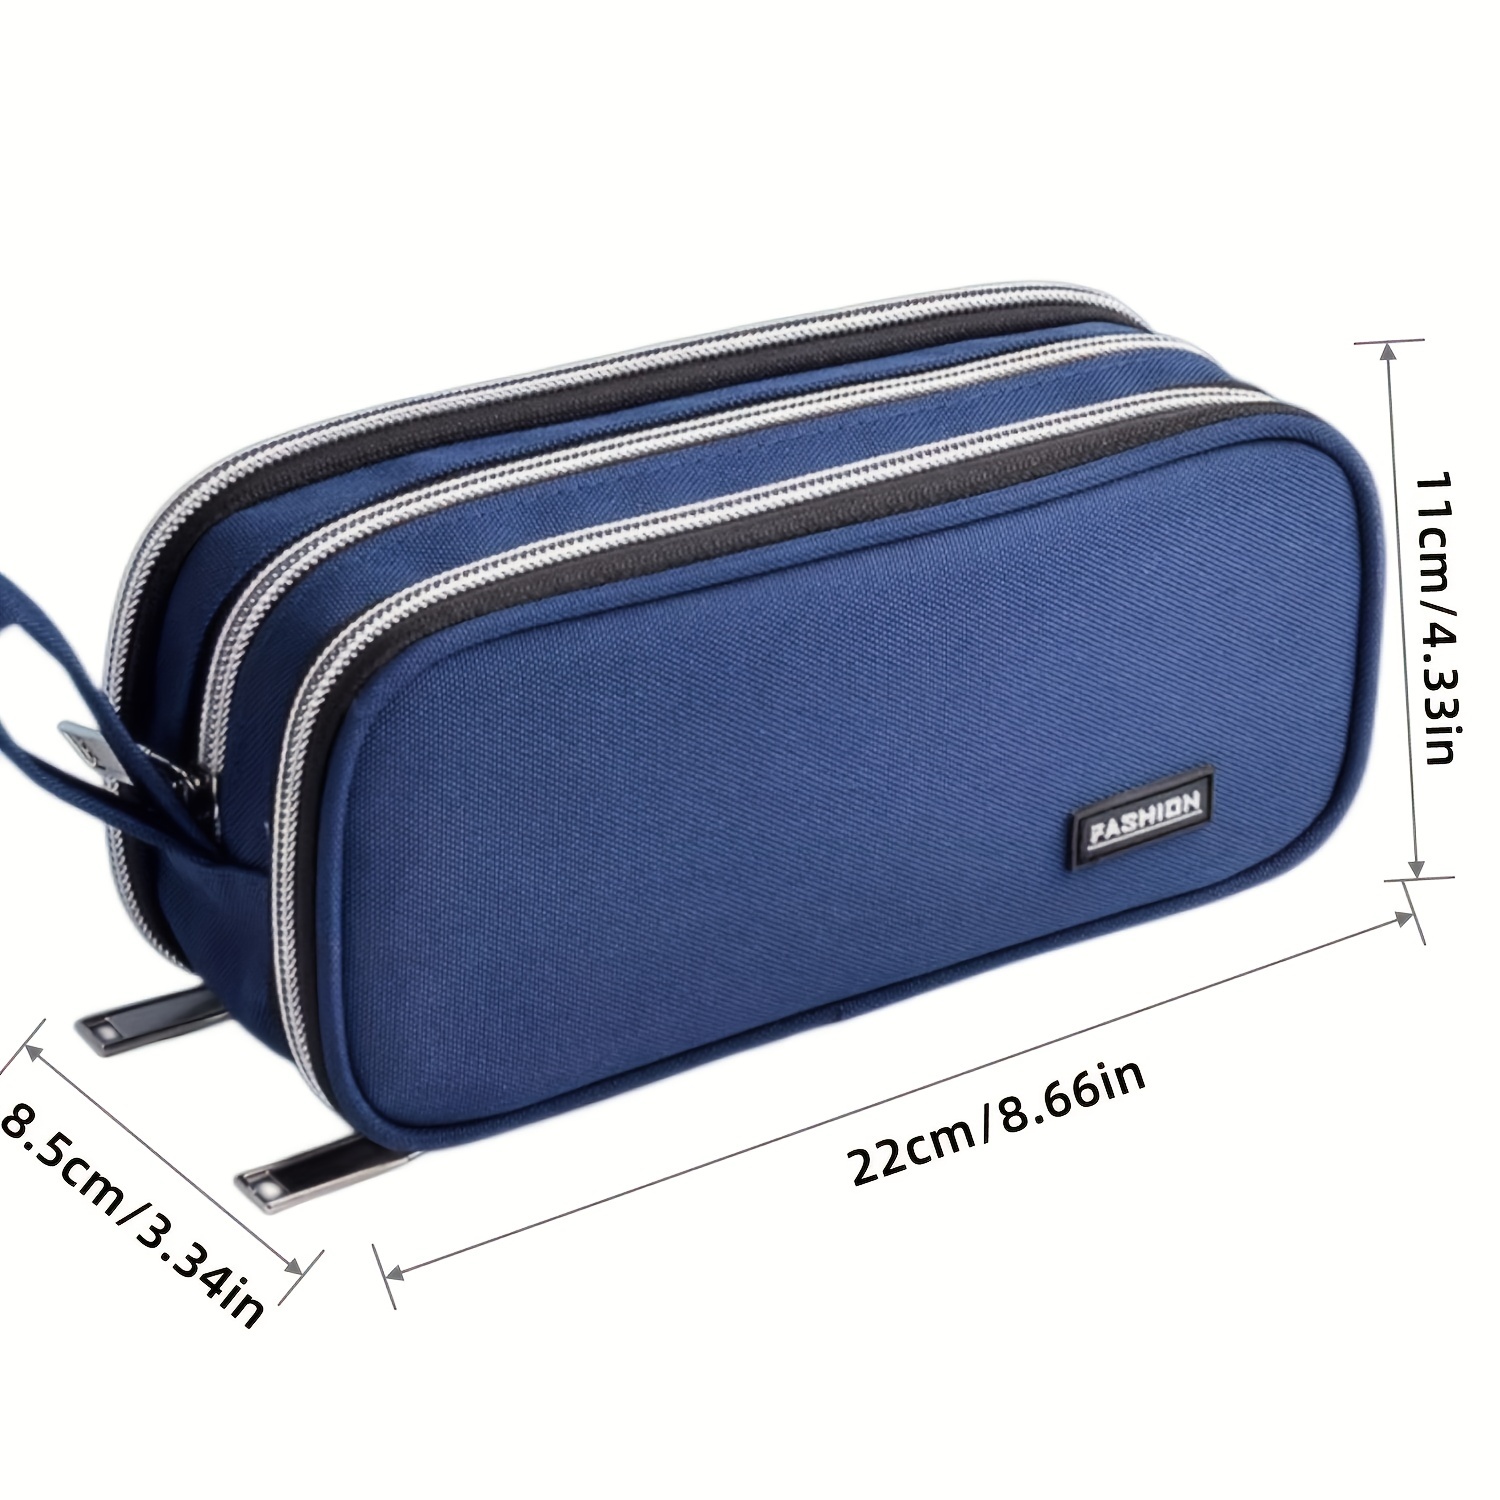 Pencil Case, Large Capacity Pencil Case, Pencil Case With 3 Compartments,  Colour Pencil Case, Pencil Case For School And Office Teenager